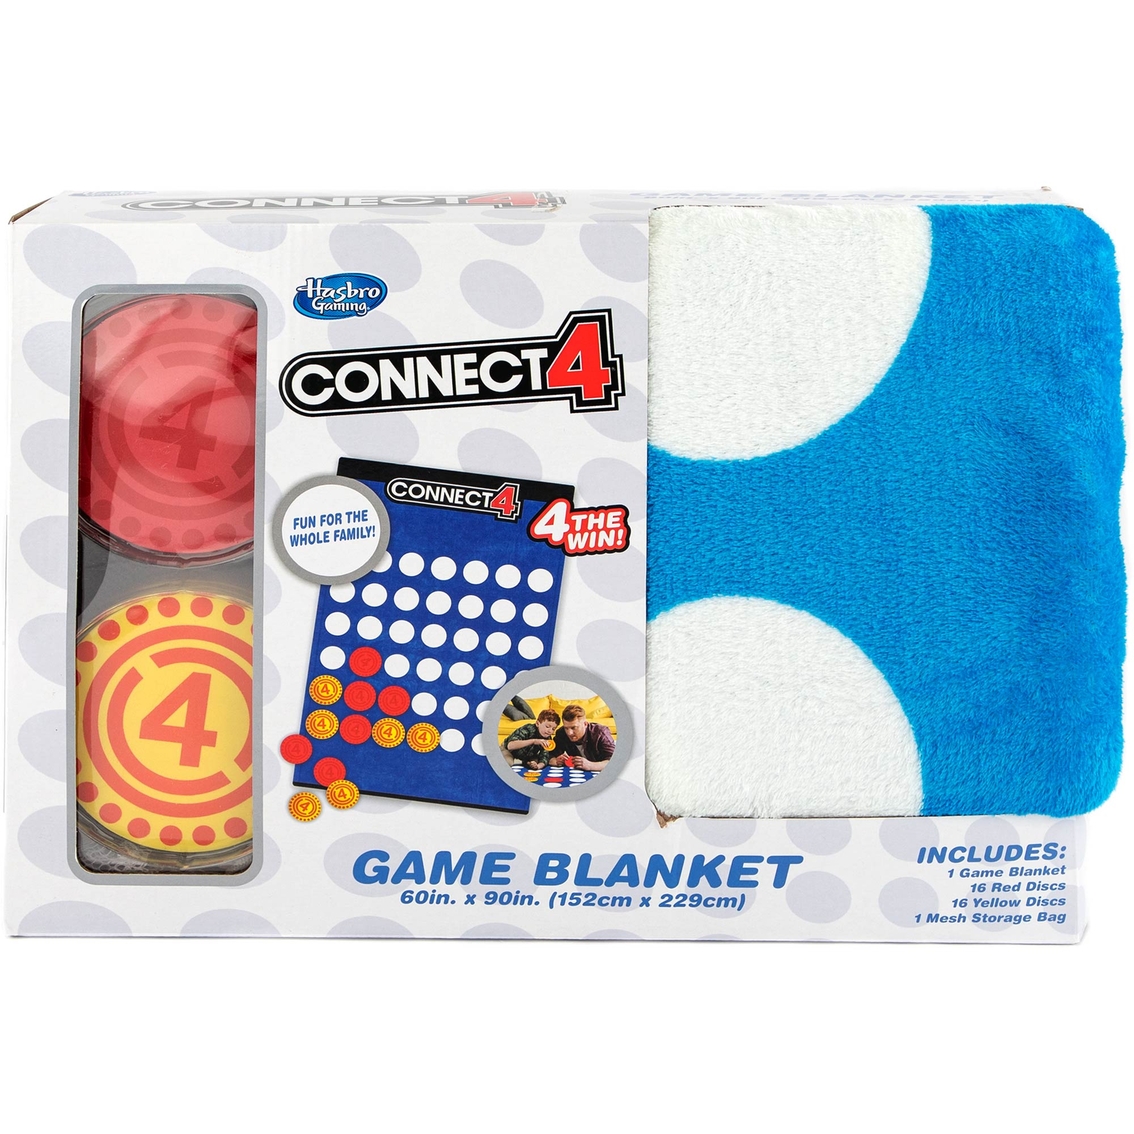 Hasbro Connect 4 Game Blanket 60 x 90 - Image 6 of 7